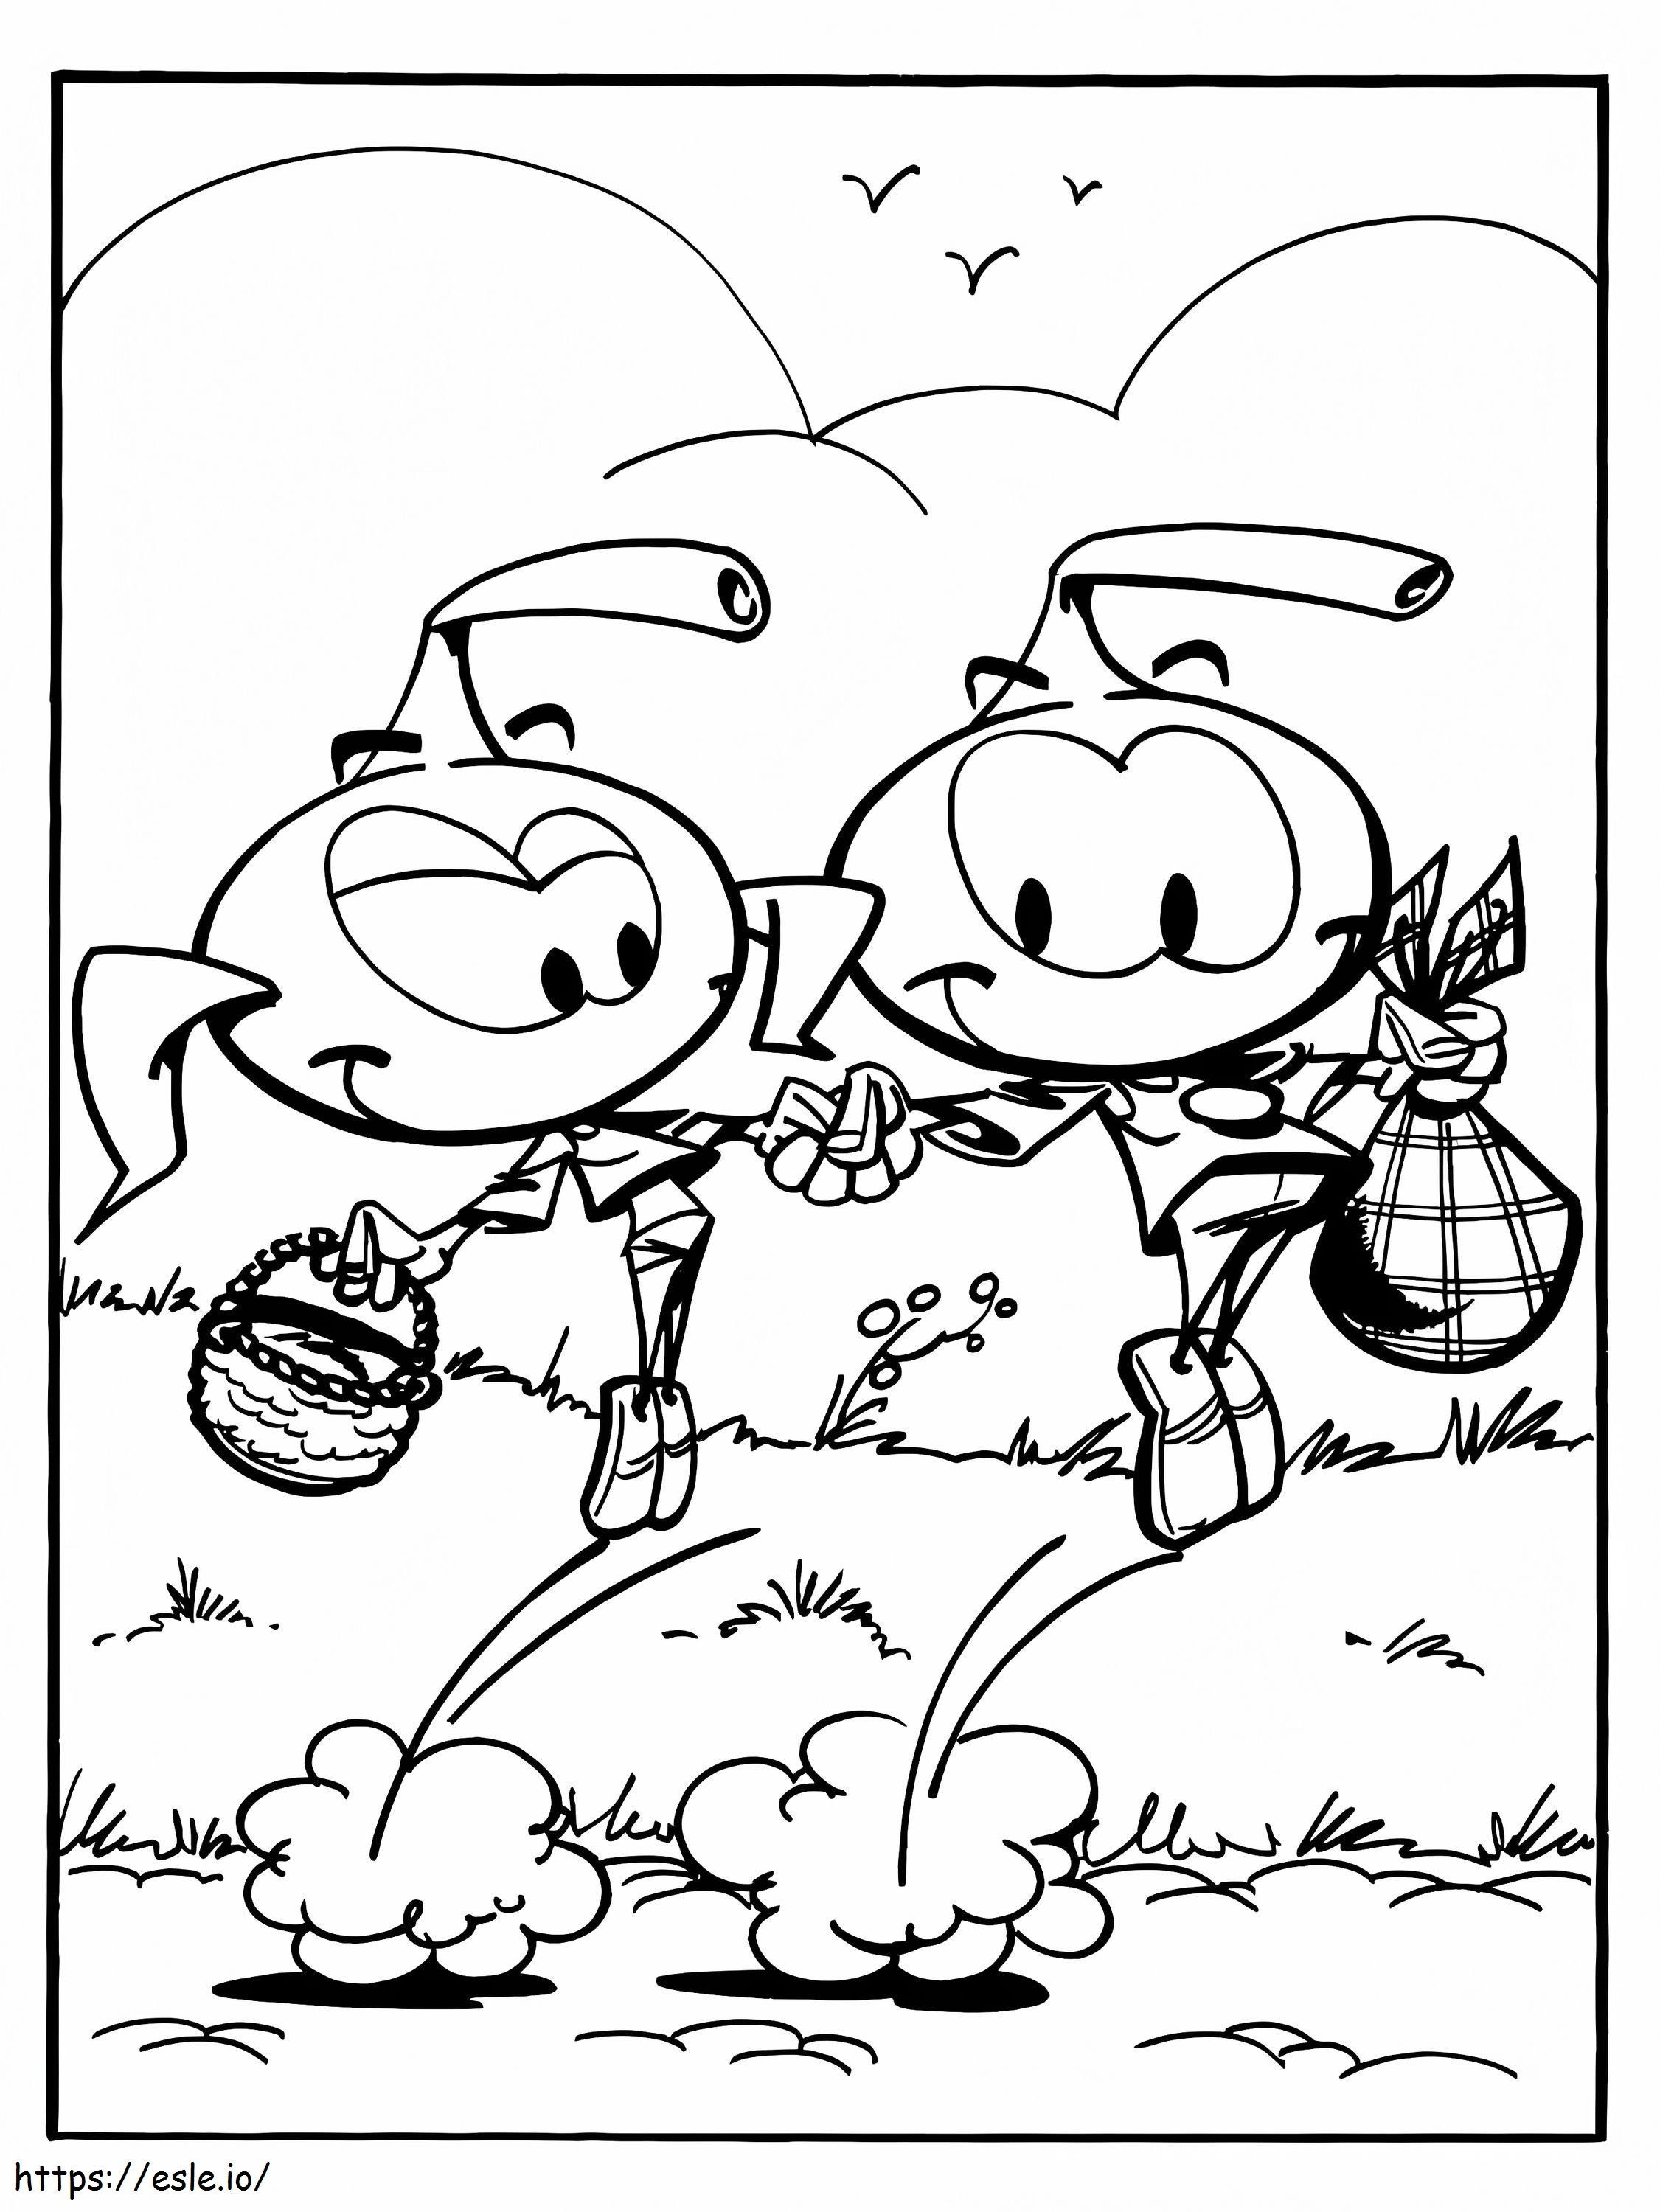 Snorks 2 coloring page